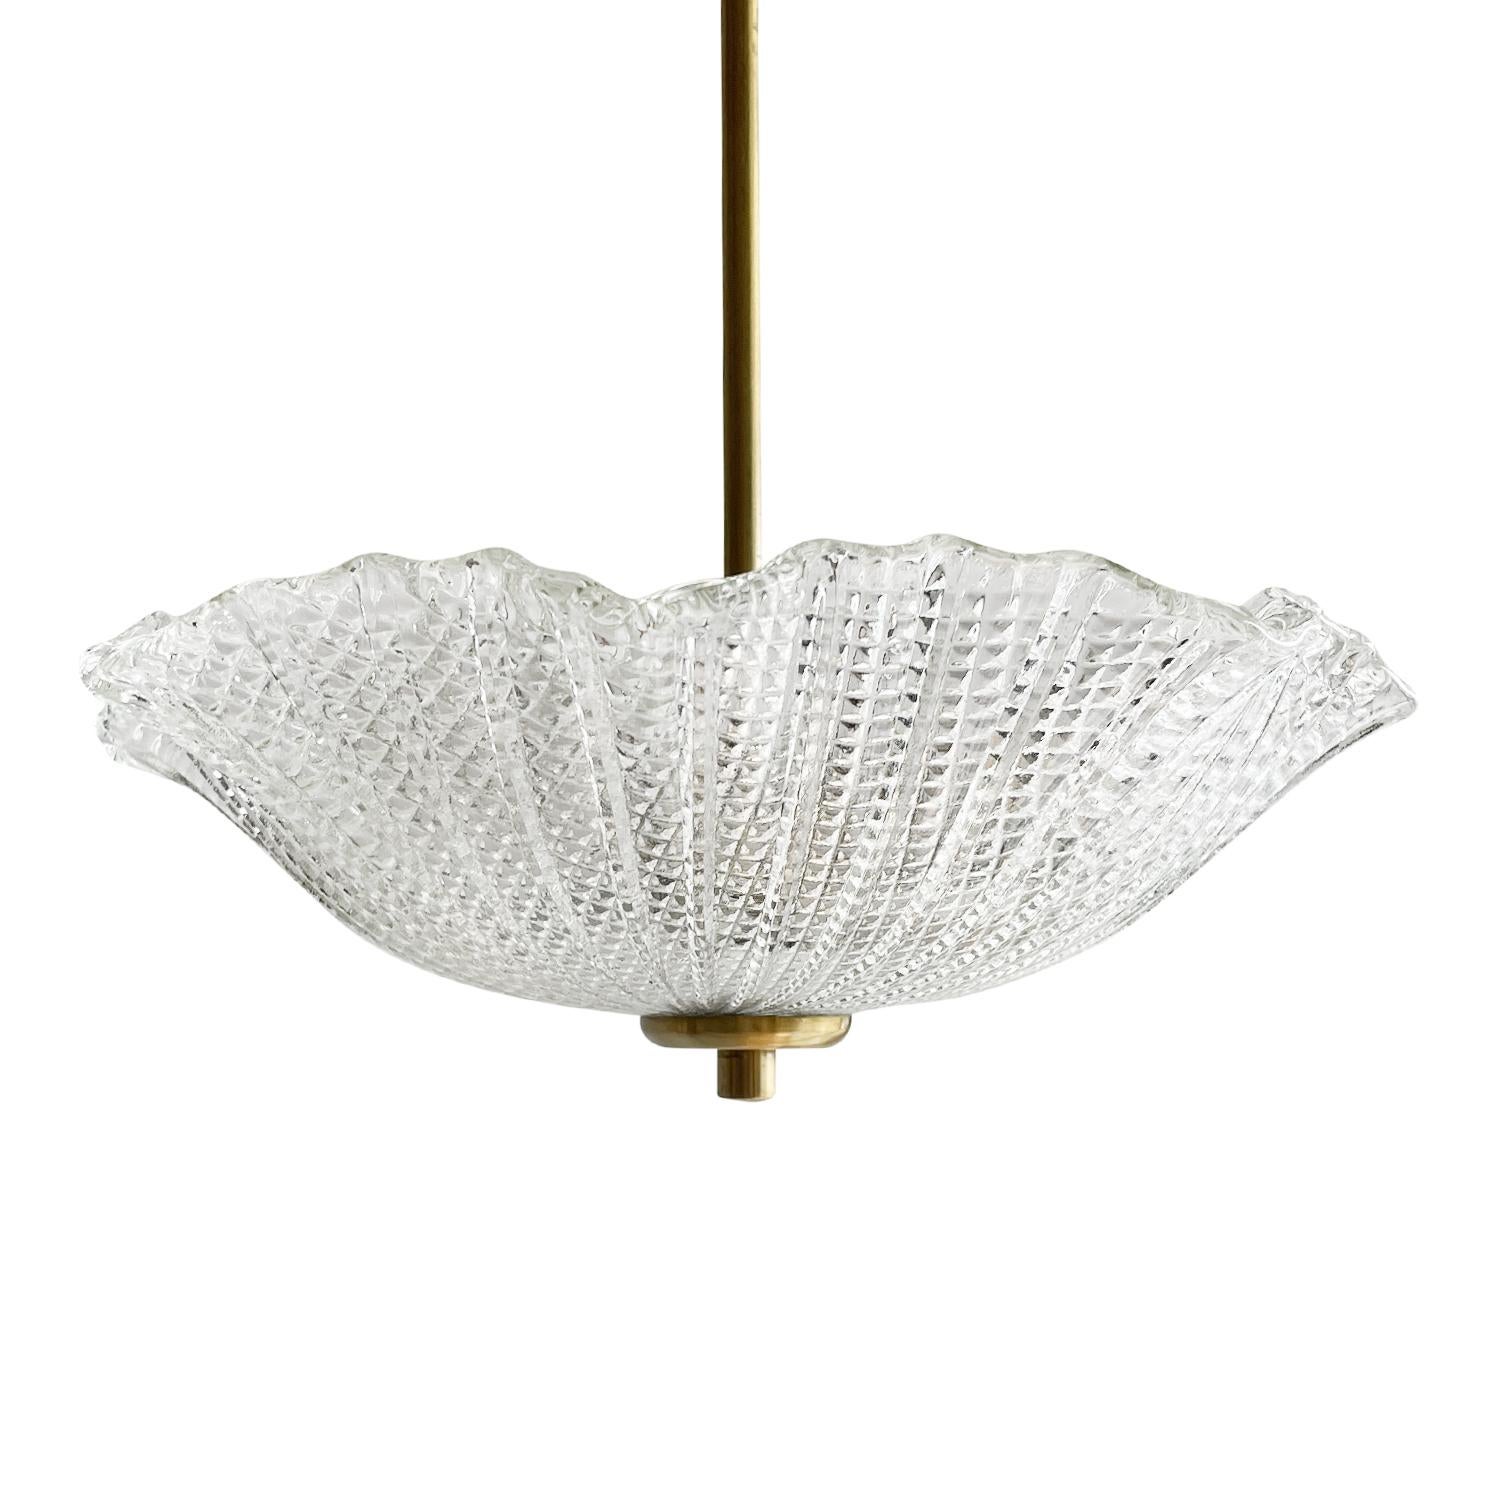 A small, vintage Mid-Cenutry modern Swedish ceiling light, lamp made of hand blown frosted glass, attributed to Orrefors in good condition. The round Scandinavian pendant is supported by a long polished brass arm, featuring a two light socket. The